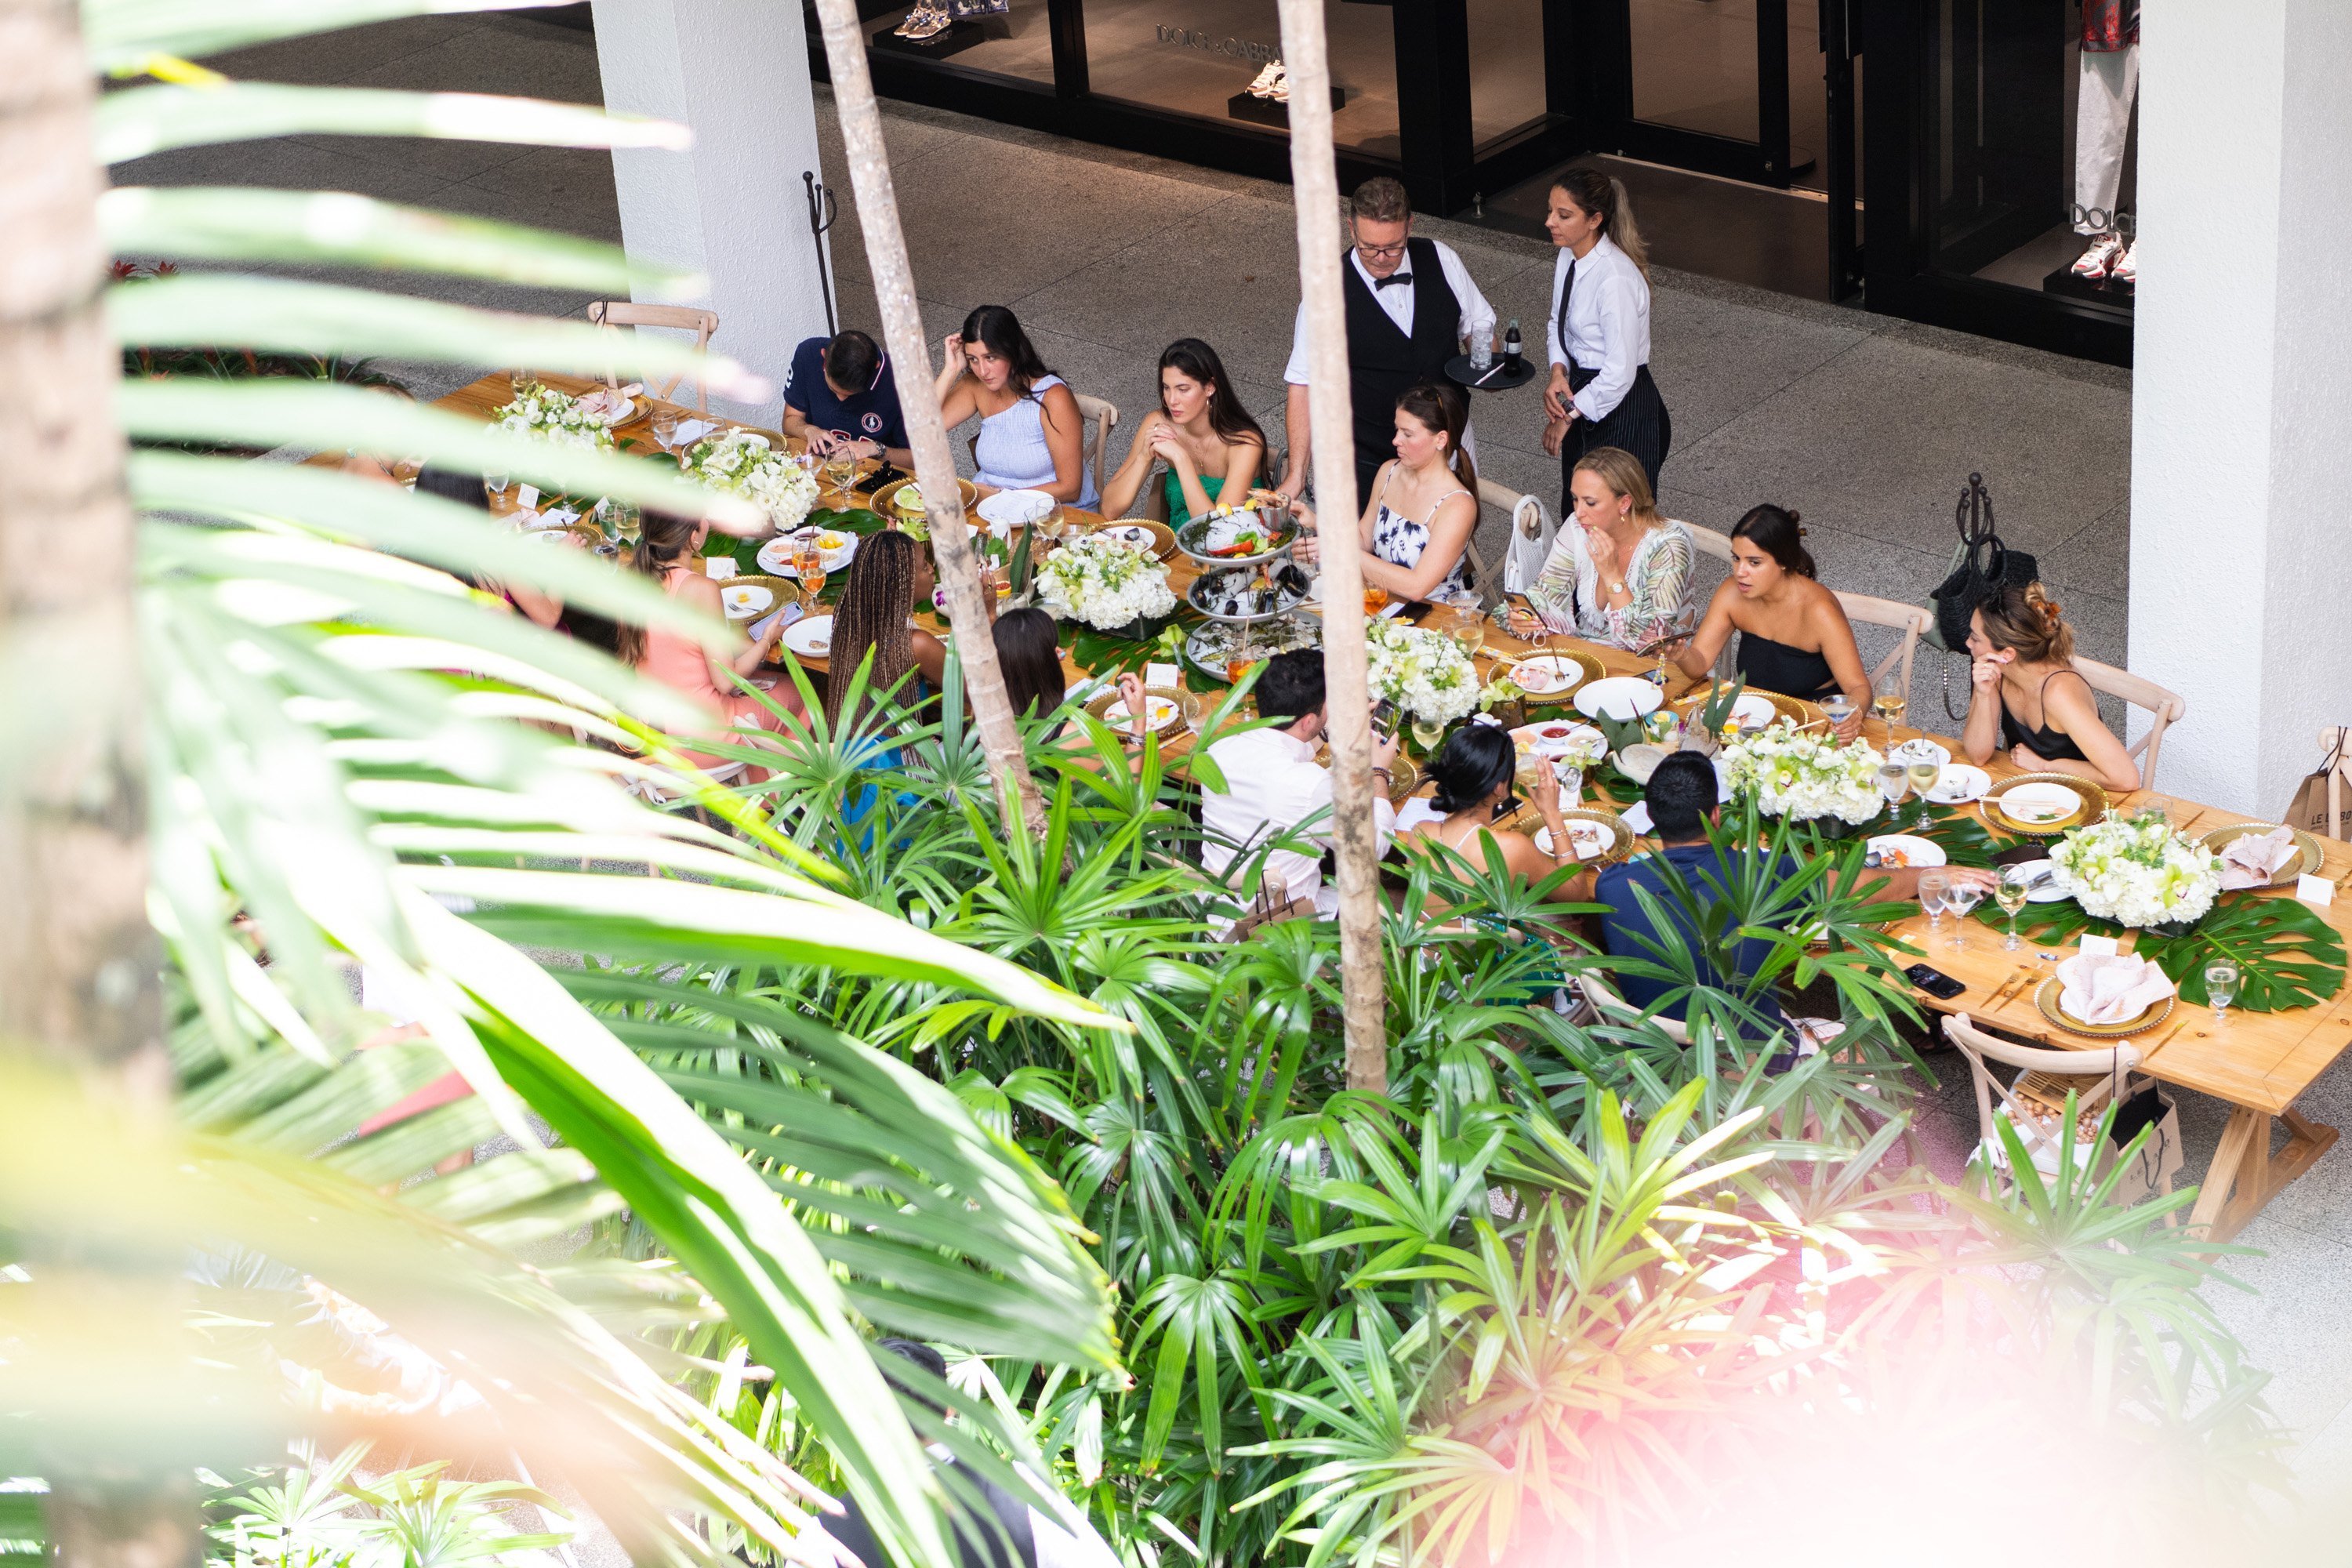 A variety of images showcasing “A Taste of Bal Harbour Shops”. Images include guests in attendance, table décor, and food featured at the event.